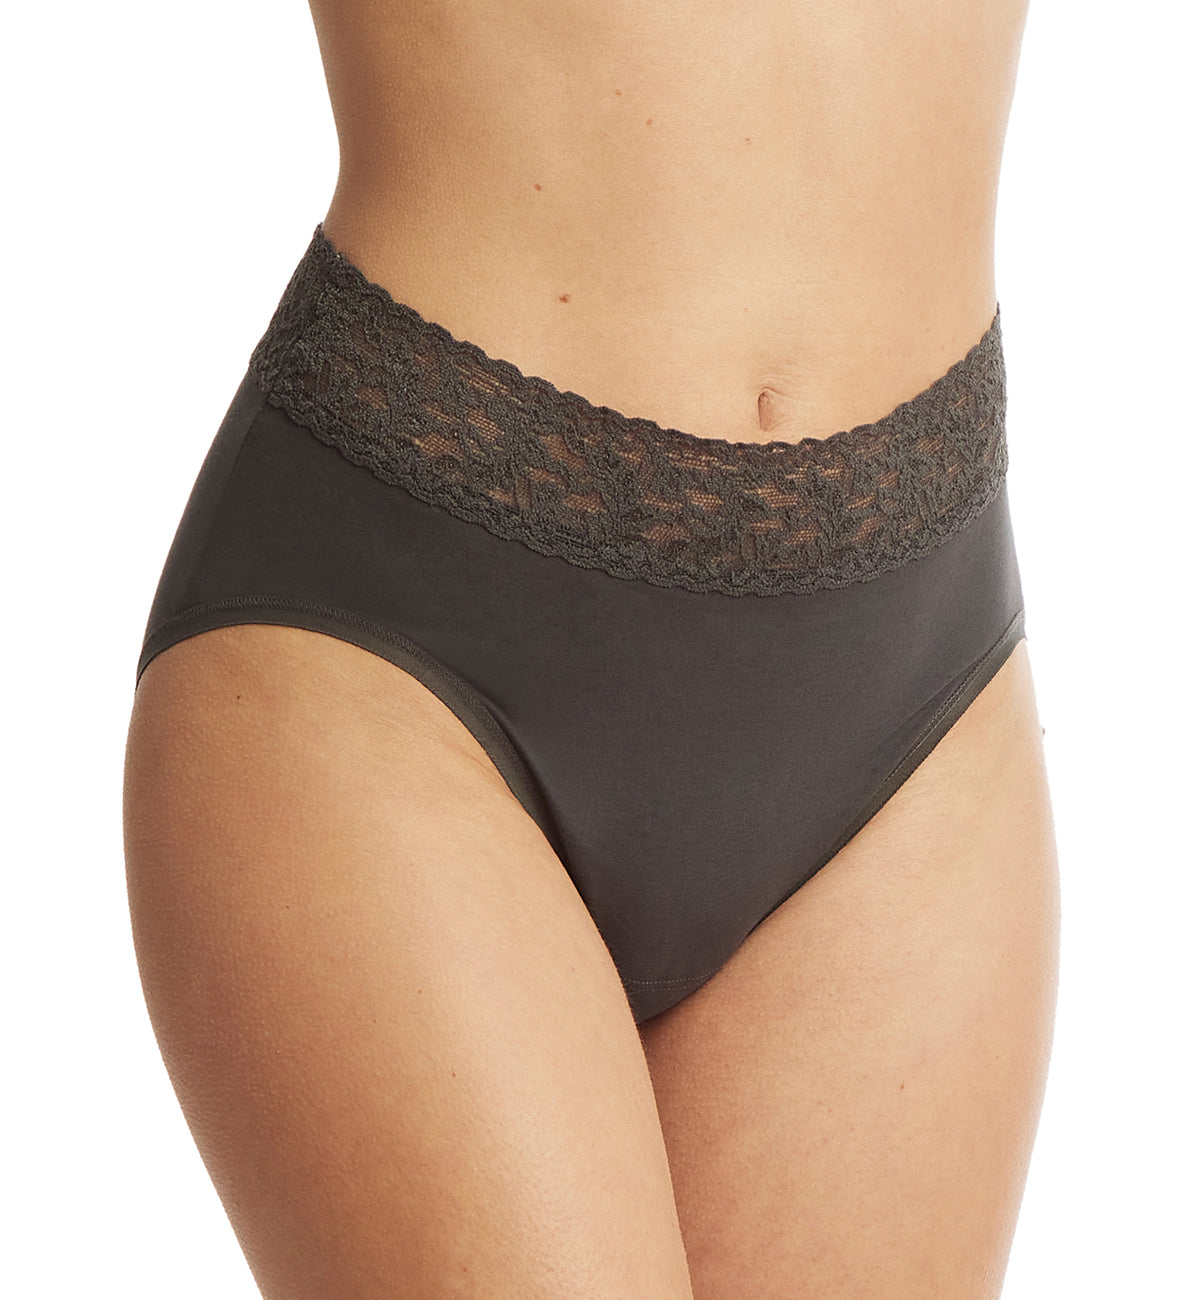 Hanky Panky Cotton French Brief with Lace (892461),Small,Granite - Granite,Small